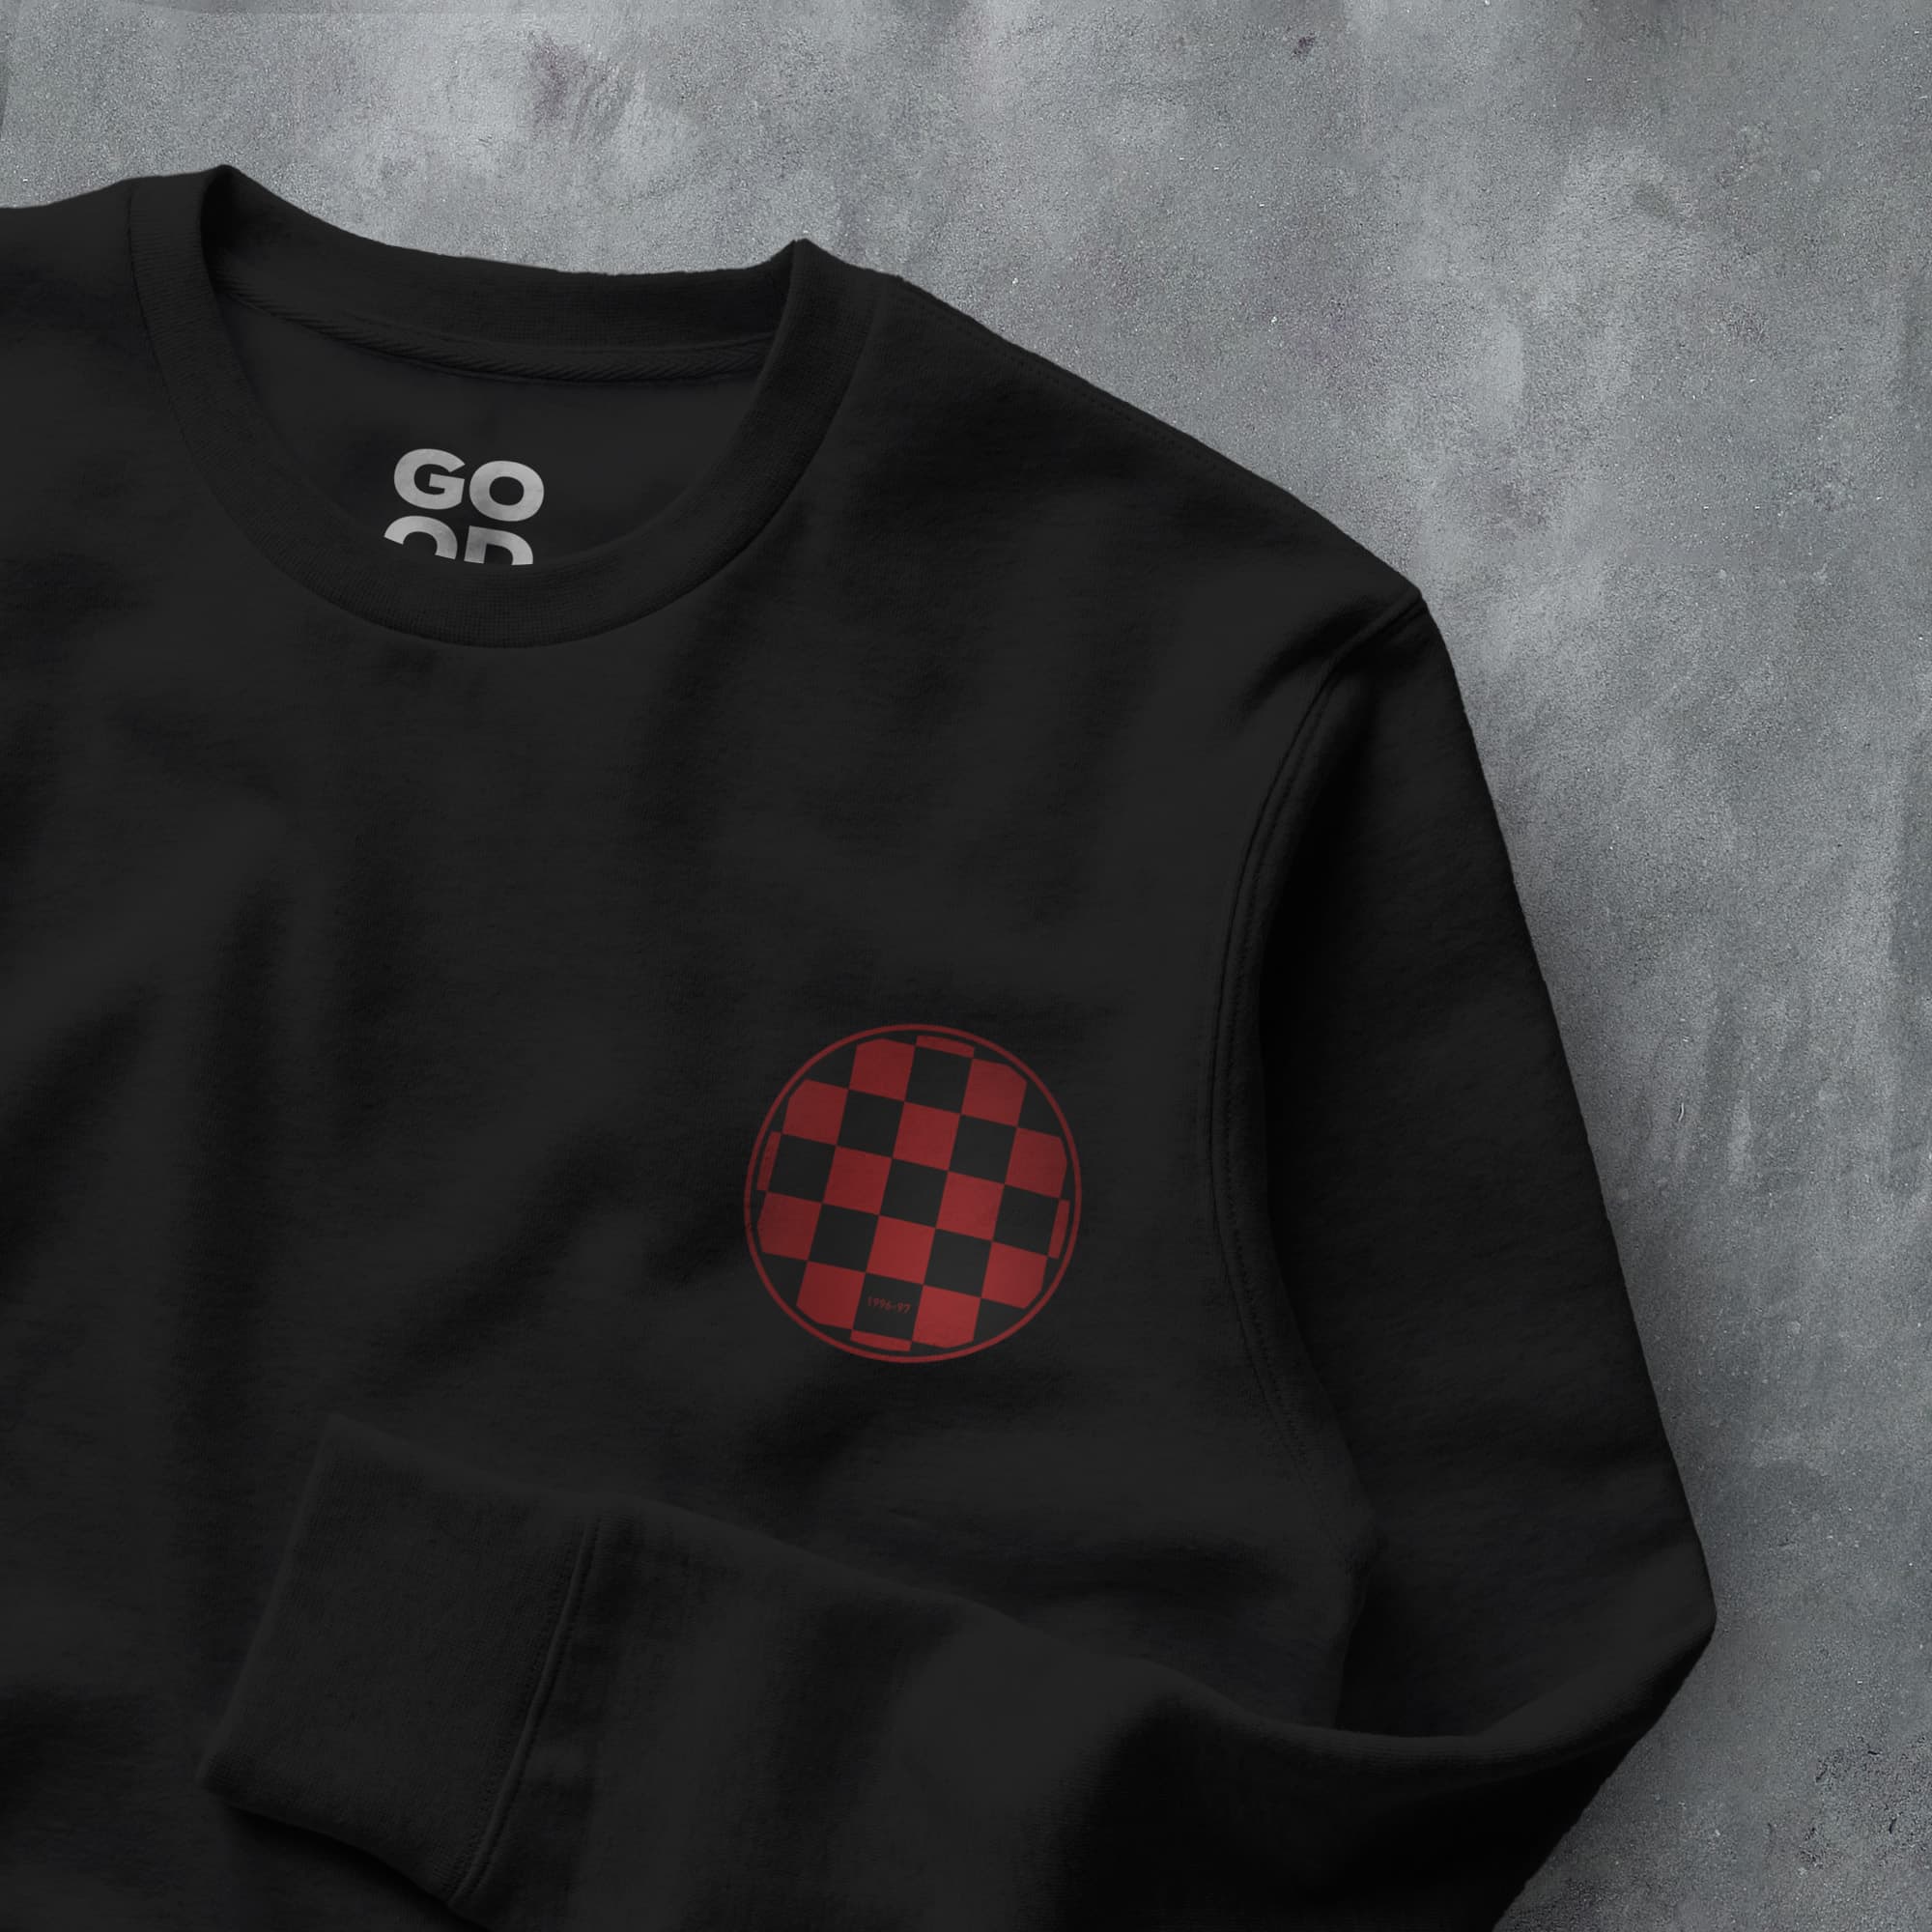 a black sweatshirt with a red and black checkered design